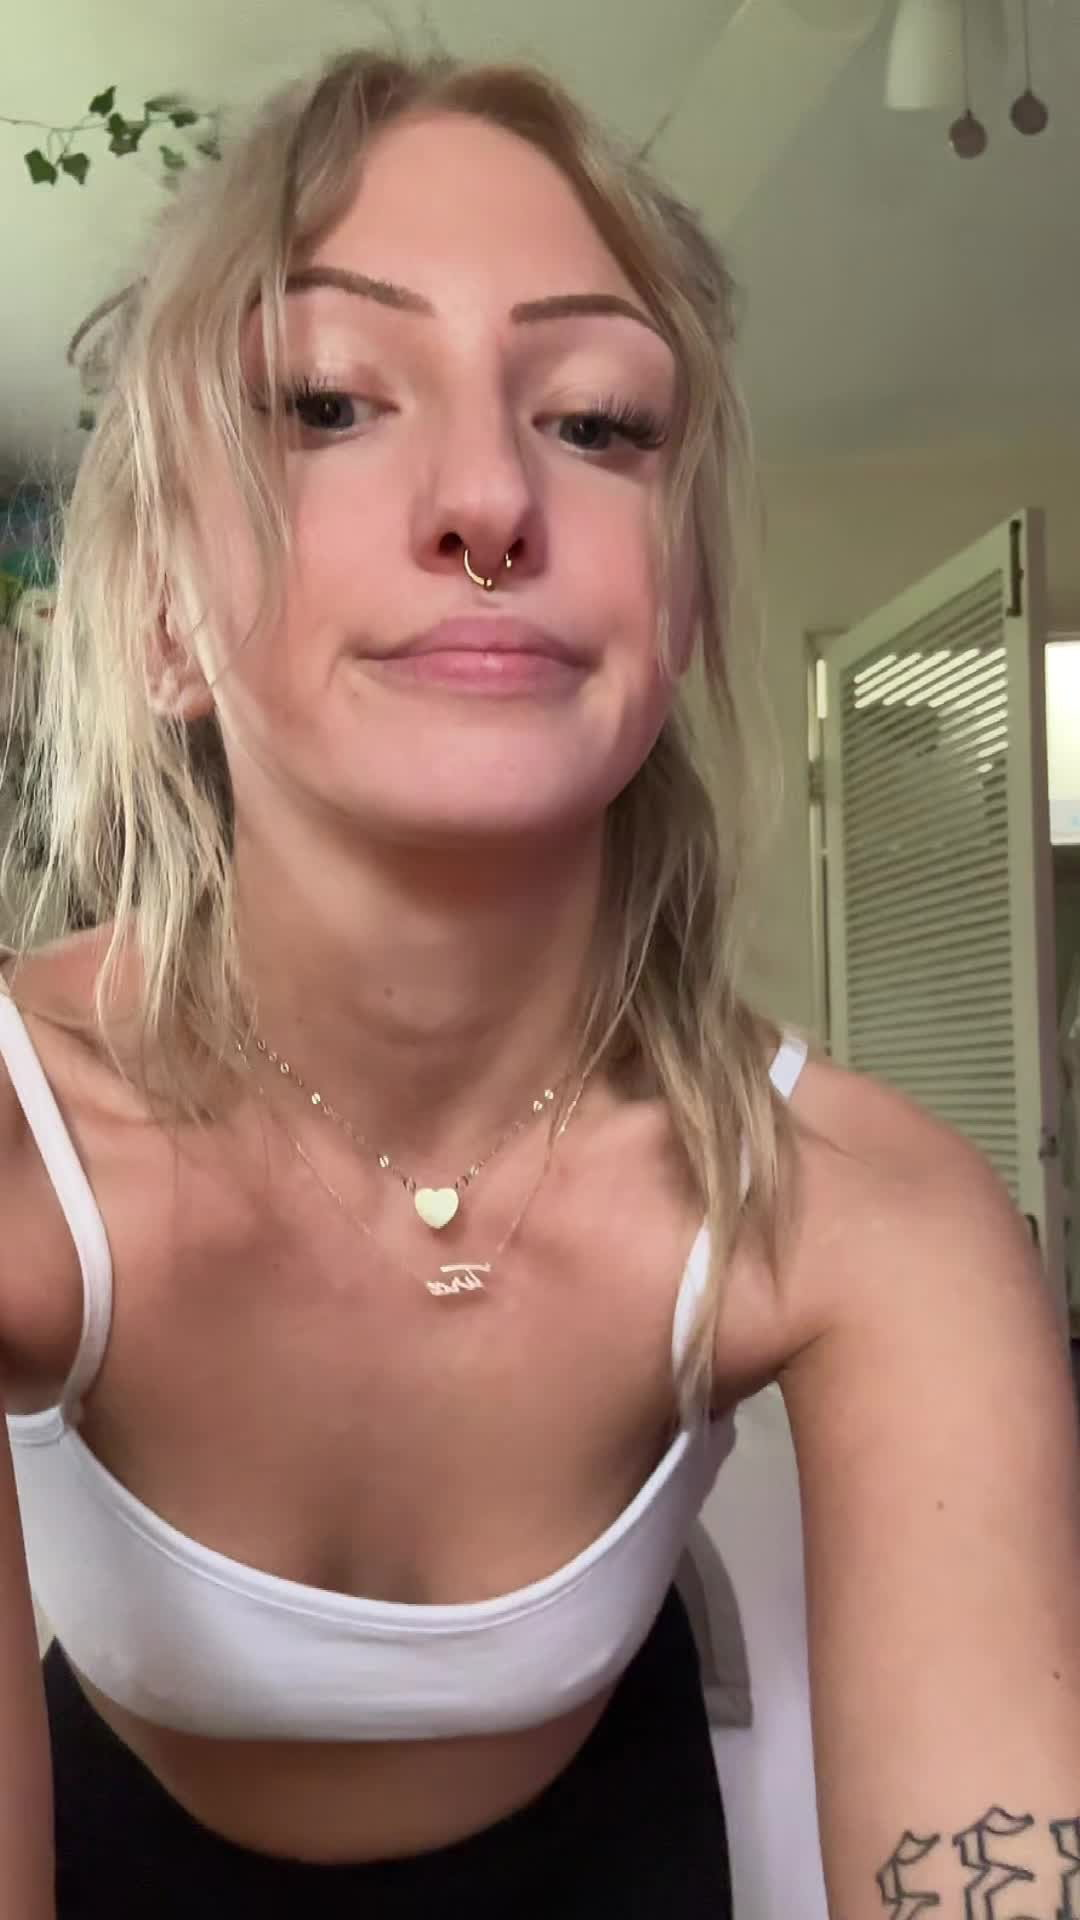 Video post by Alexis